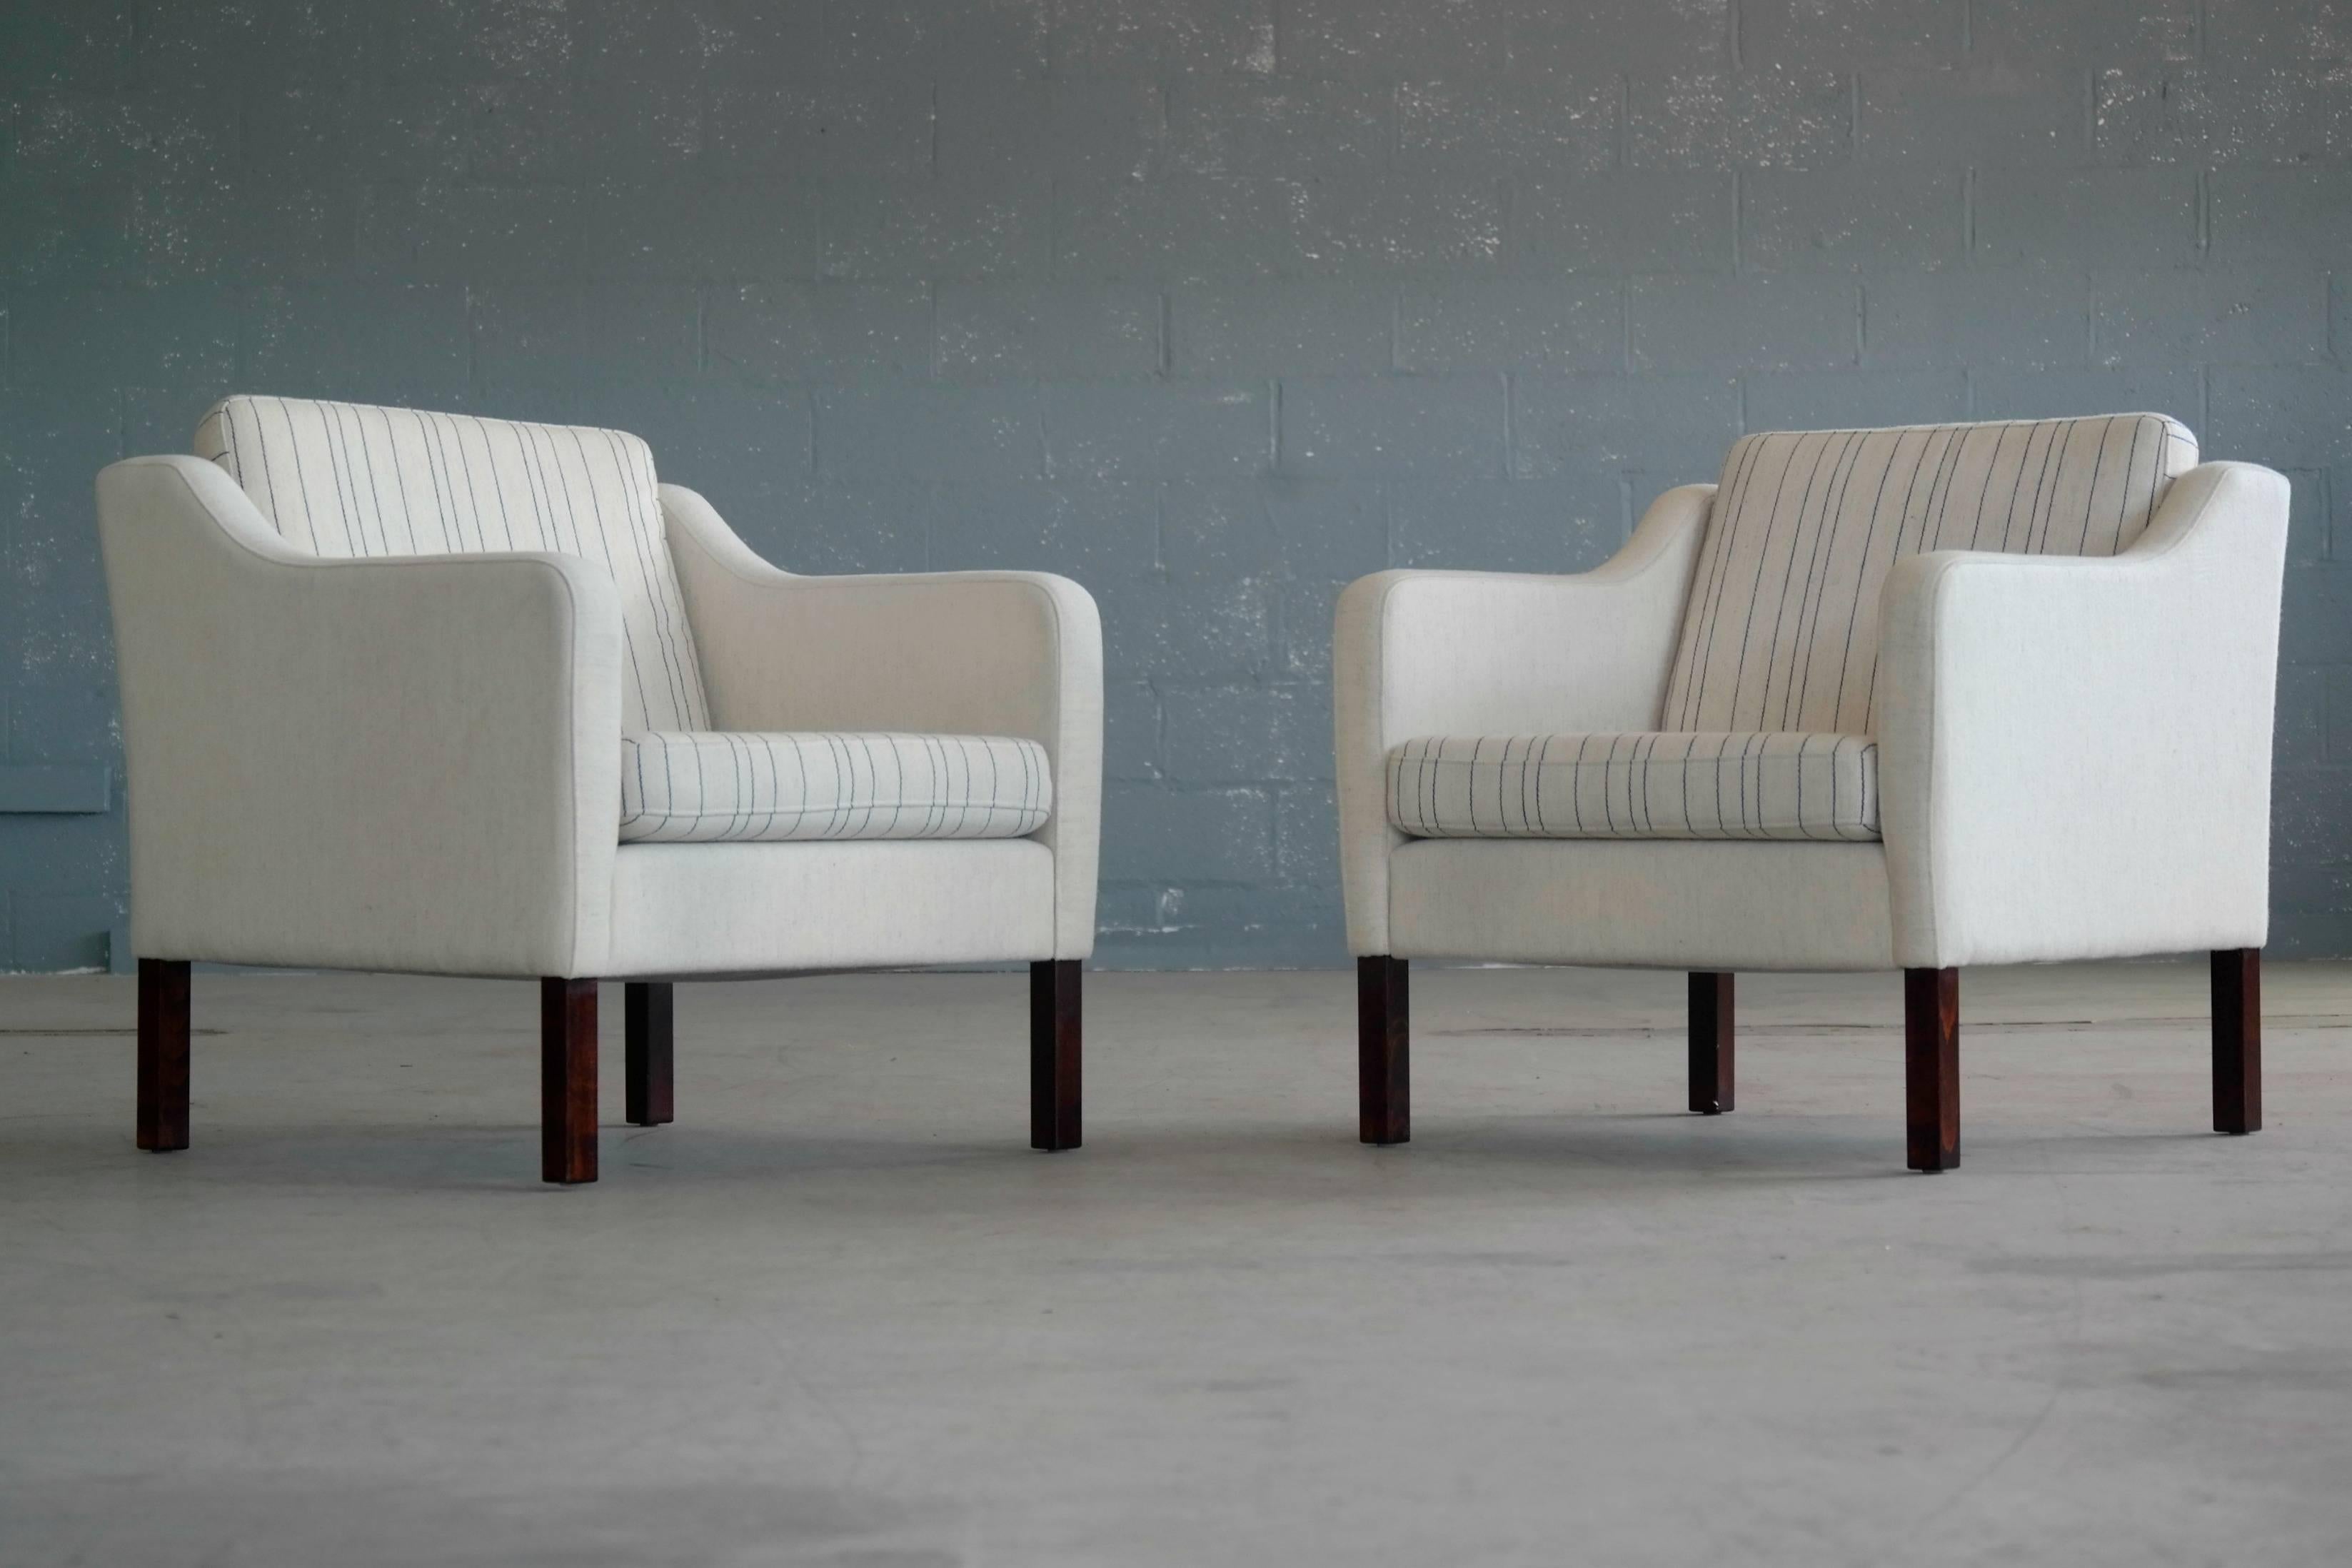 Very elegant pair of lounge chairs in the style of Borge Mogensen's Model 2421. These chairs by Mogens Hansen were designed in the 1960s and produced, circa 1970. The chairs have stained beech wood legs and are covered in a luxurious cream white